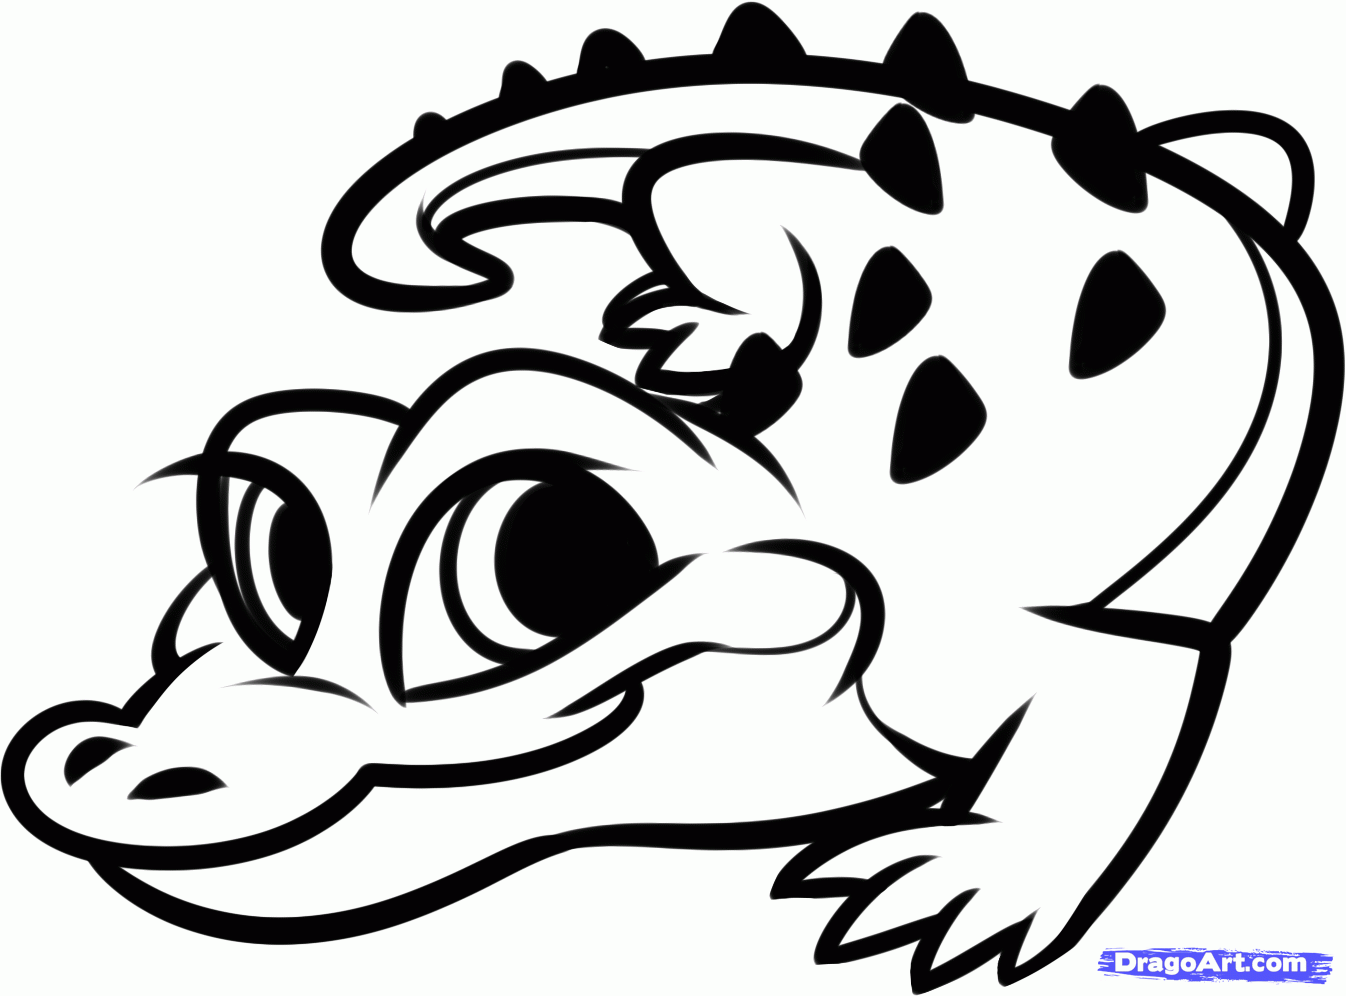 Gator Clipart Black And White | Free download on ClipArtMag